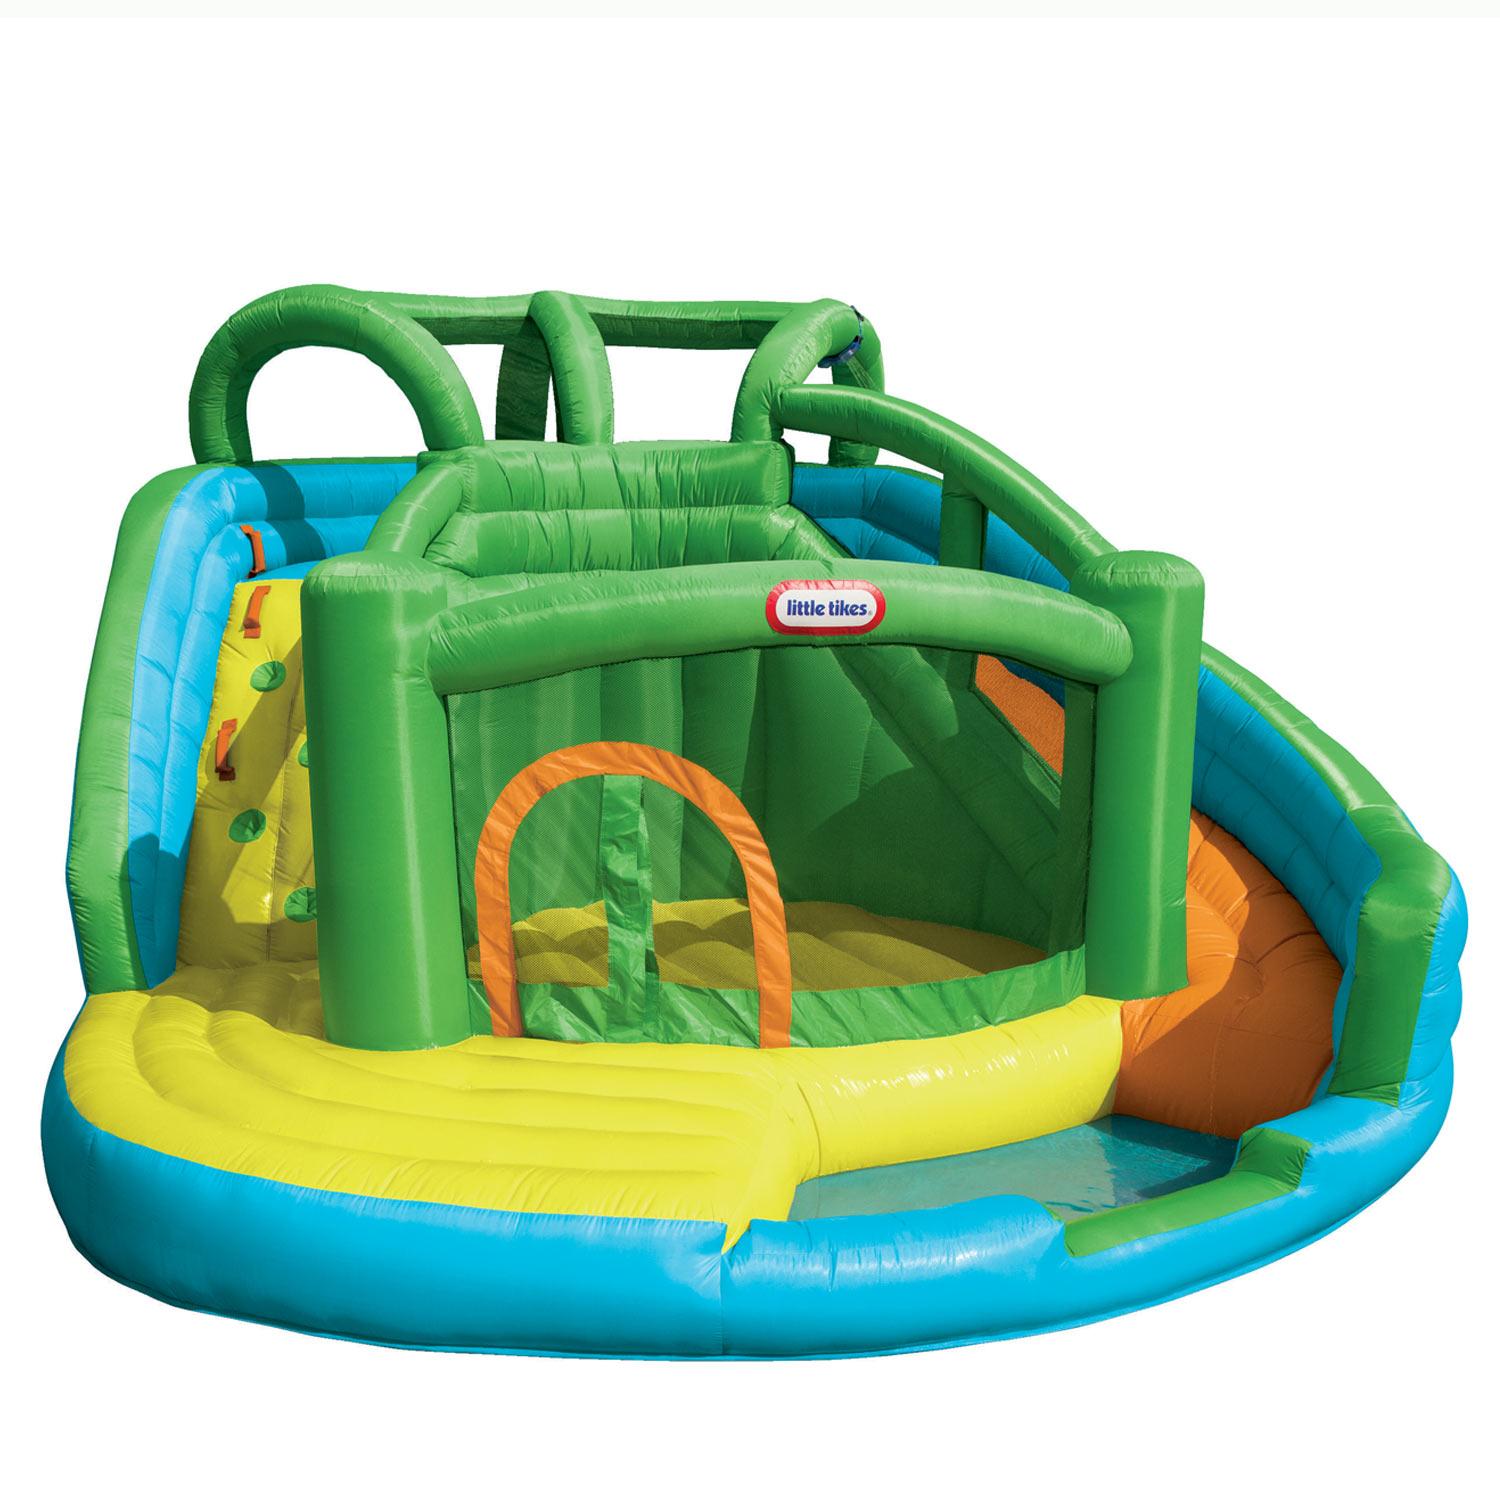 2-in-1 Wet 'n Dry Bouncer at Little Tikes